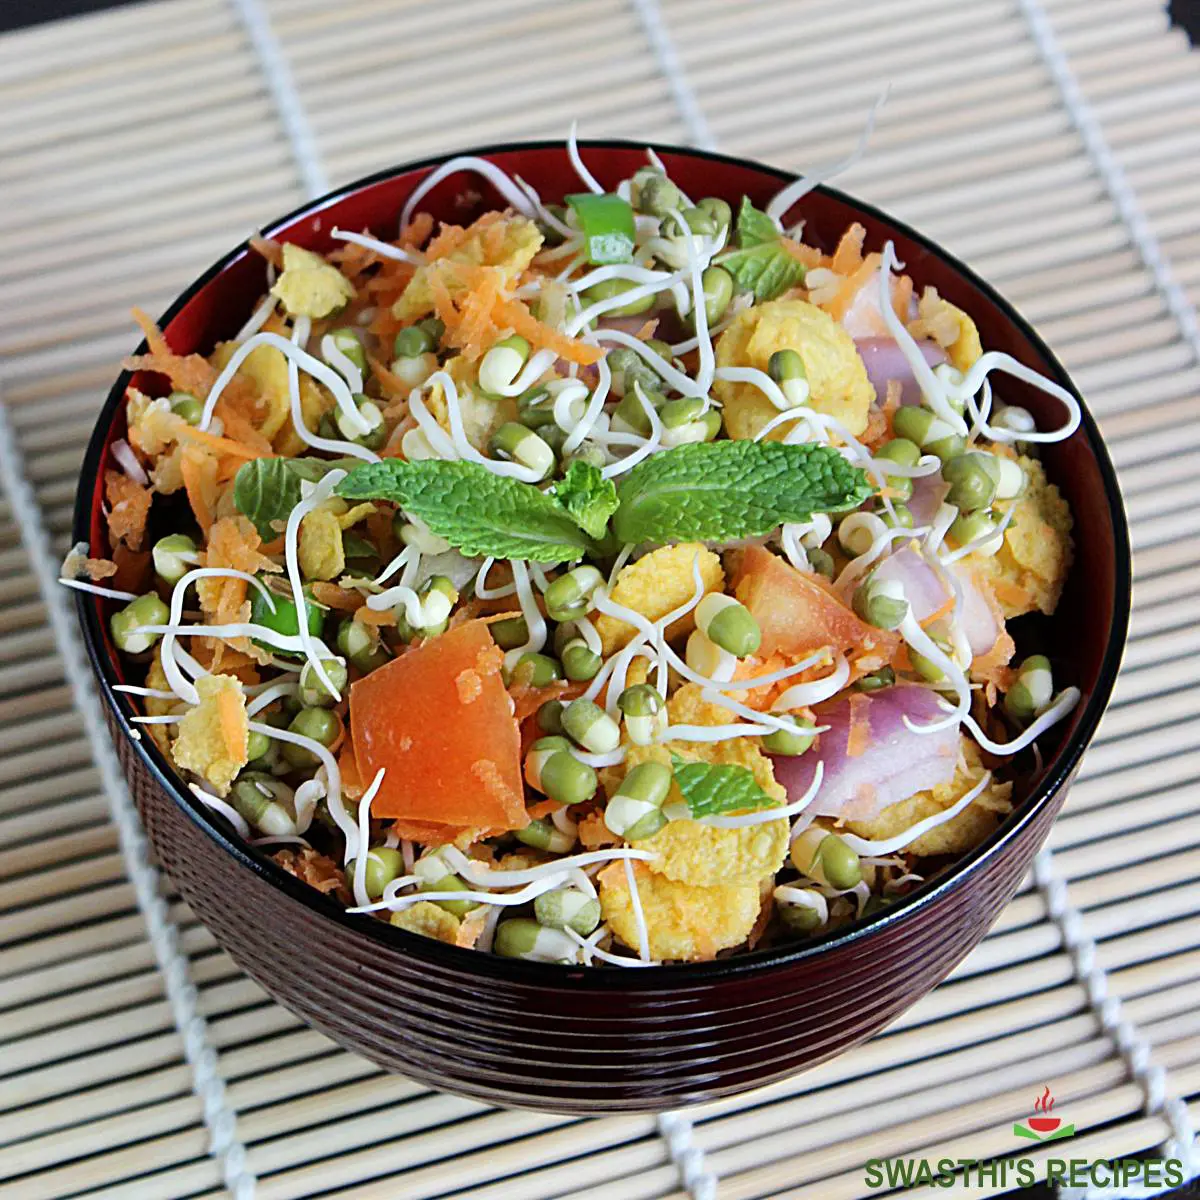 Sprouts salad made with green gram sprouts vegetables and herbs